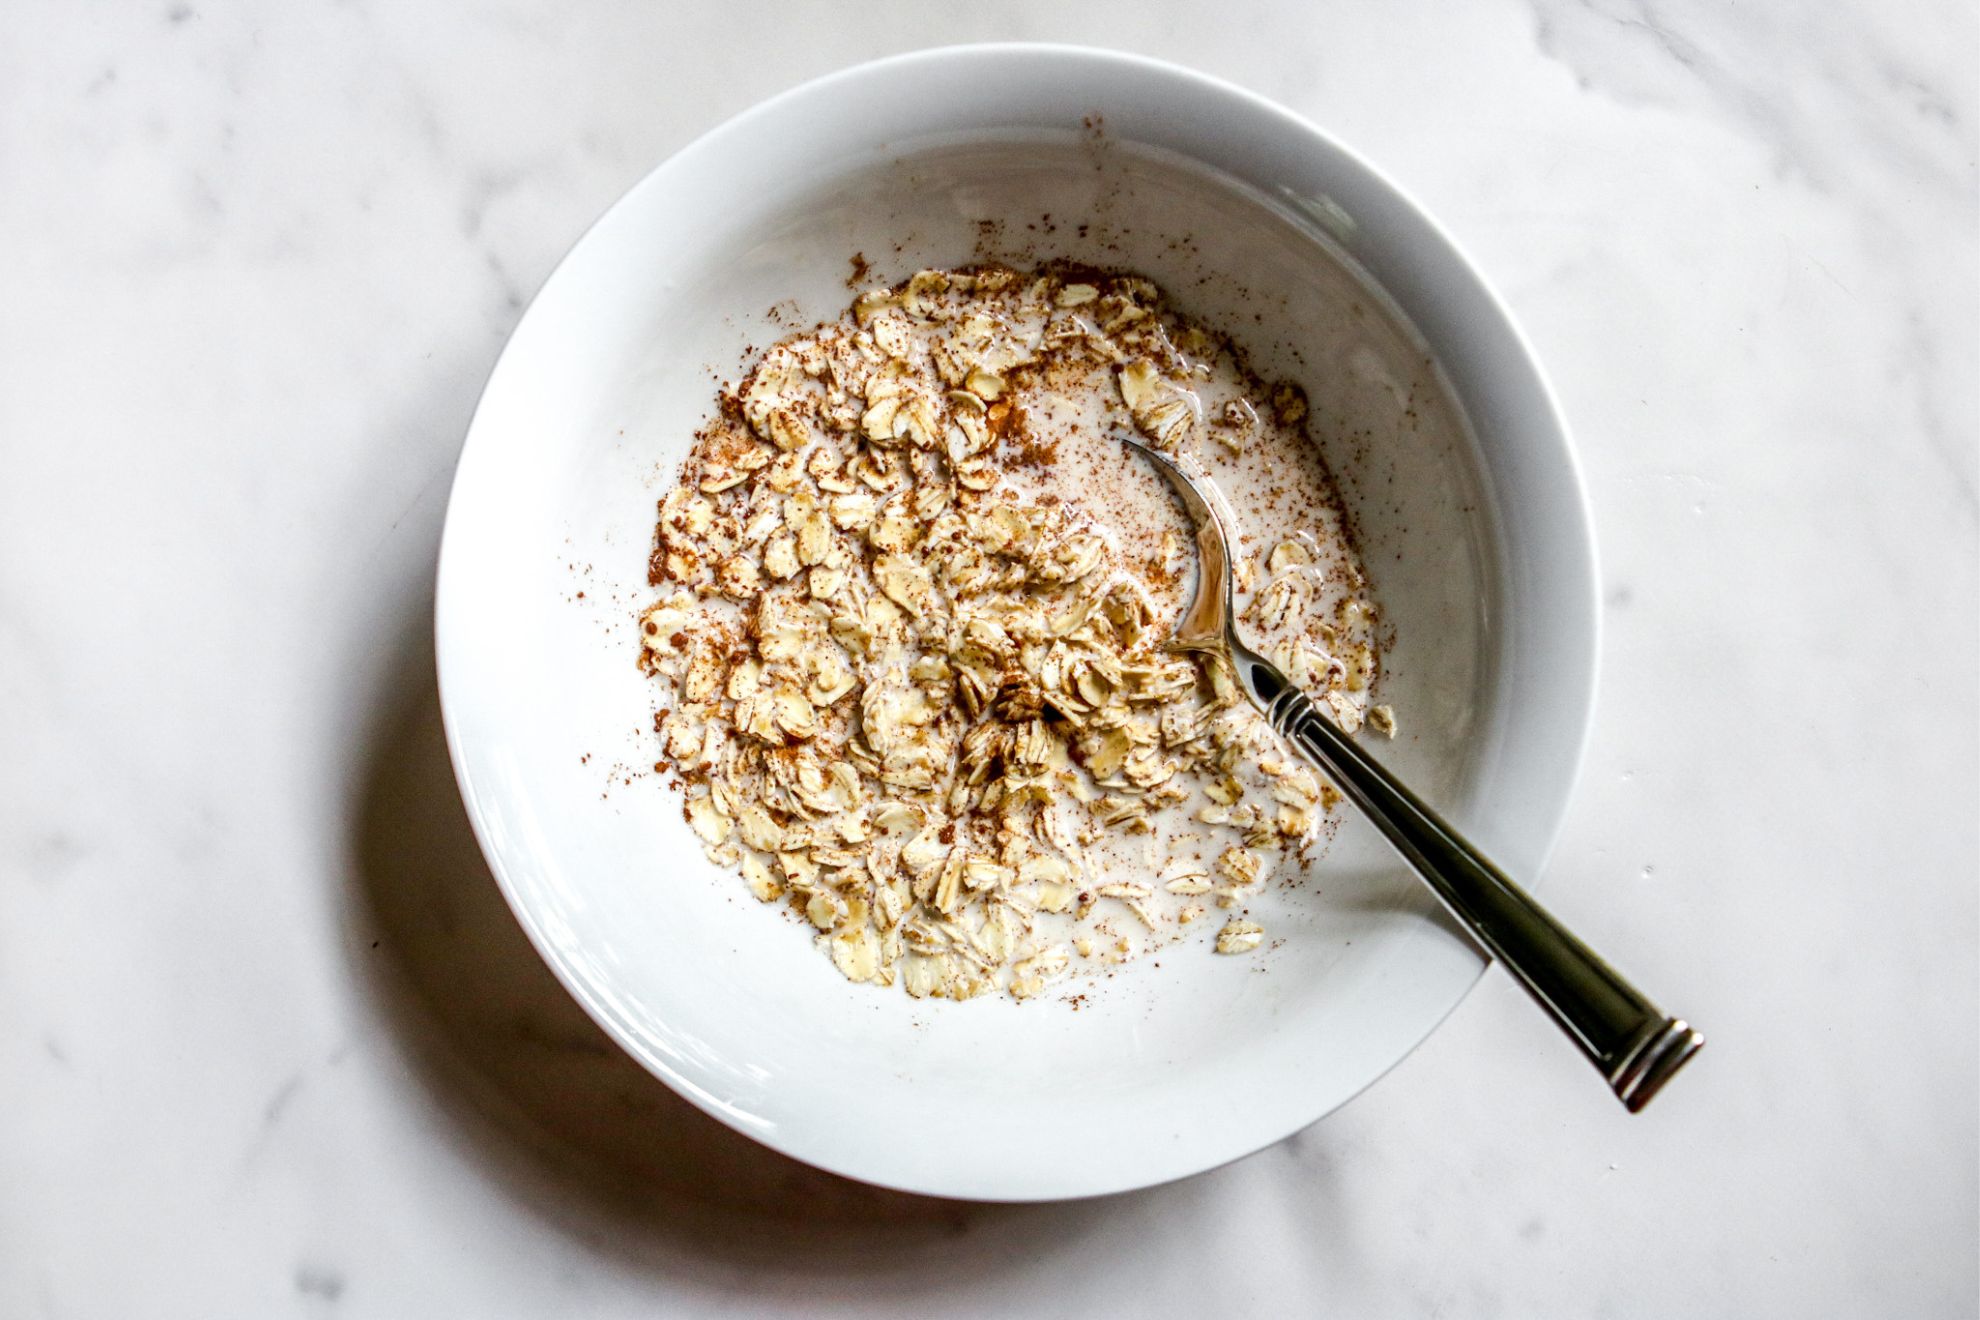 This is an overhead horizontal image of a white bowl on a white marble surface. In the bowl is a milk, spice and oat combination. A silver spoon is in the oatmeal and leaning against the side of the bowl with the handle pointing to the bottom right corner of the image.